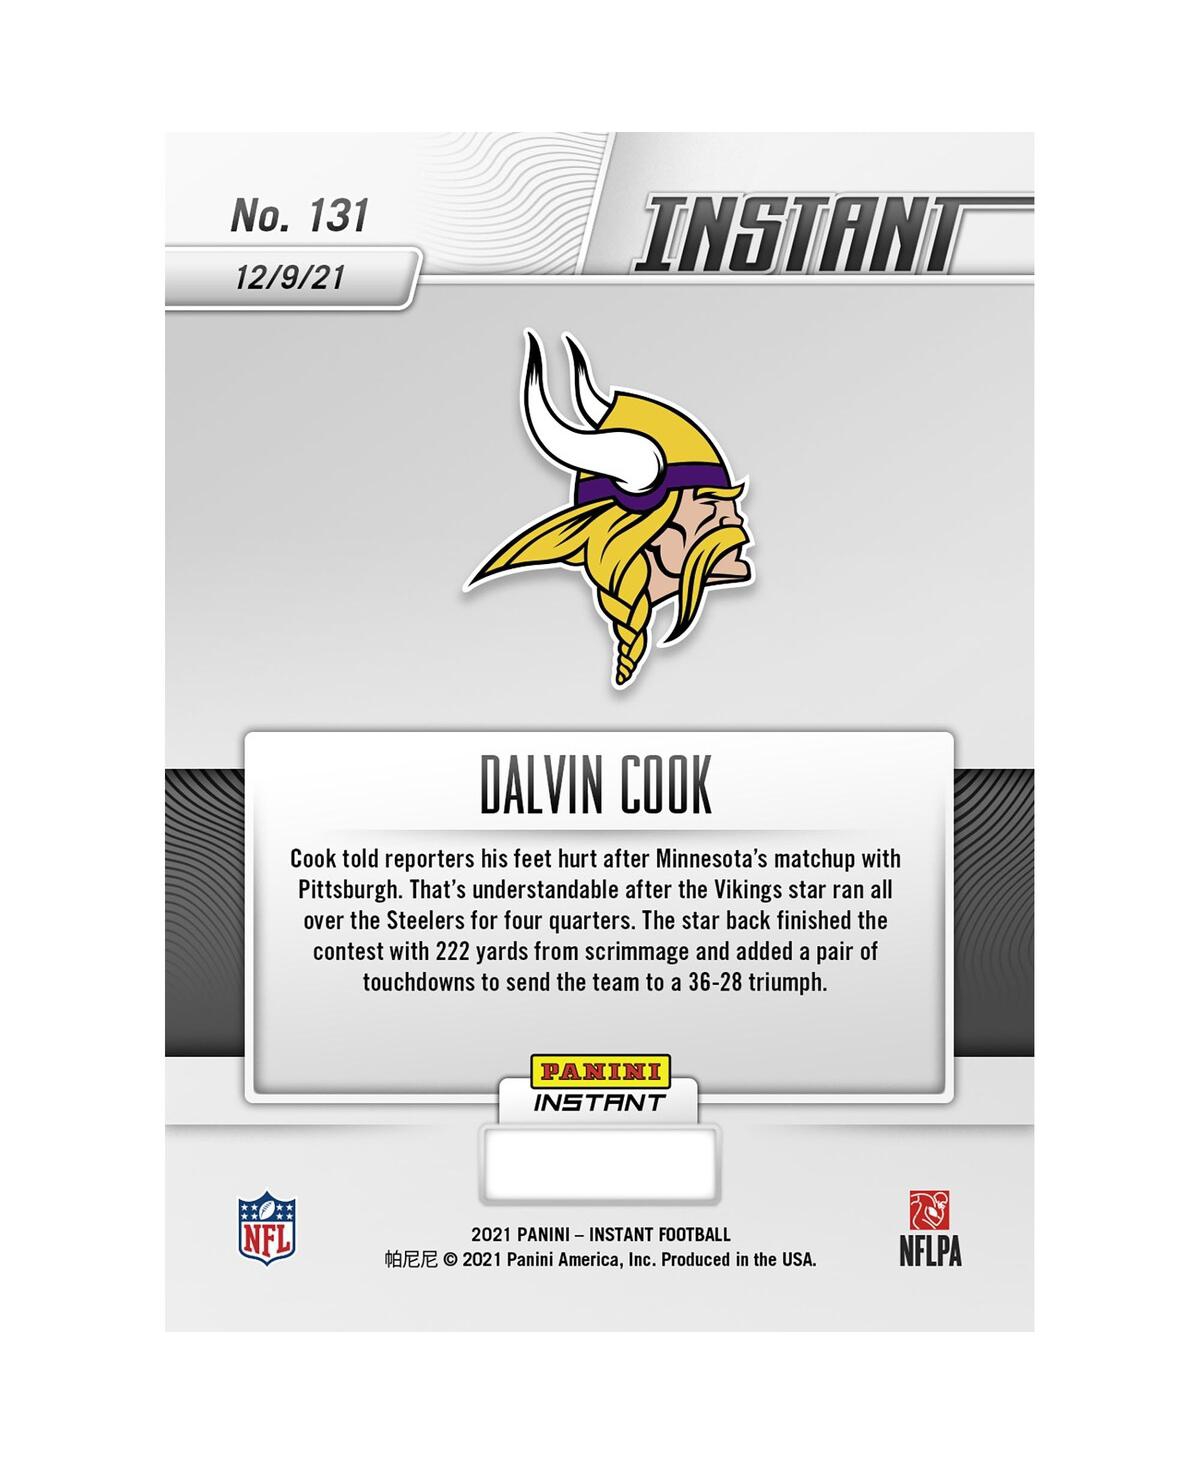 Shop Panini America Dalvin Cook Minnesota Vikings Parallel  Instant Nfl Week 14 Cook Shreds Steelers With  In Multi